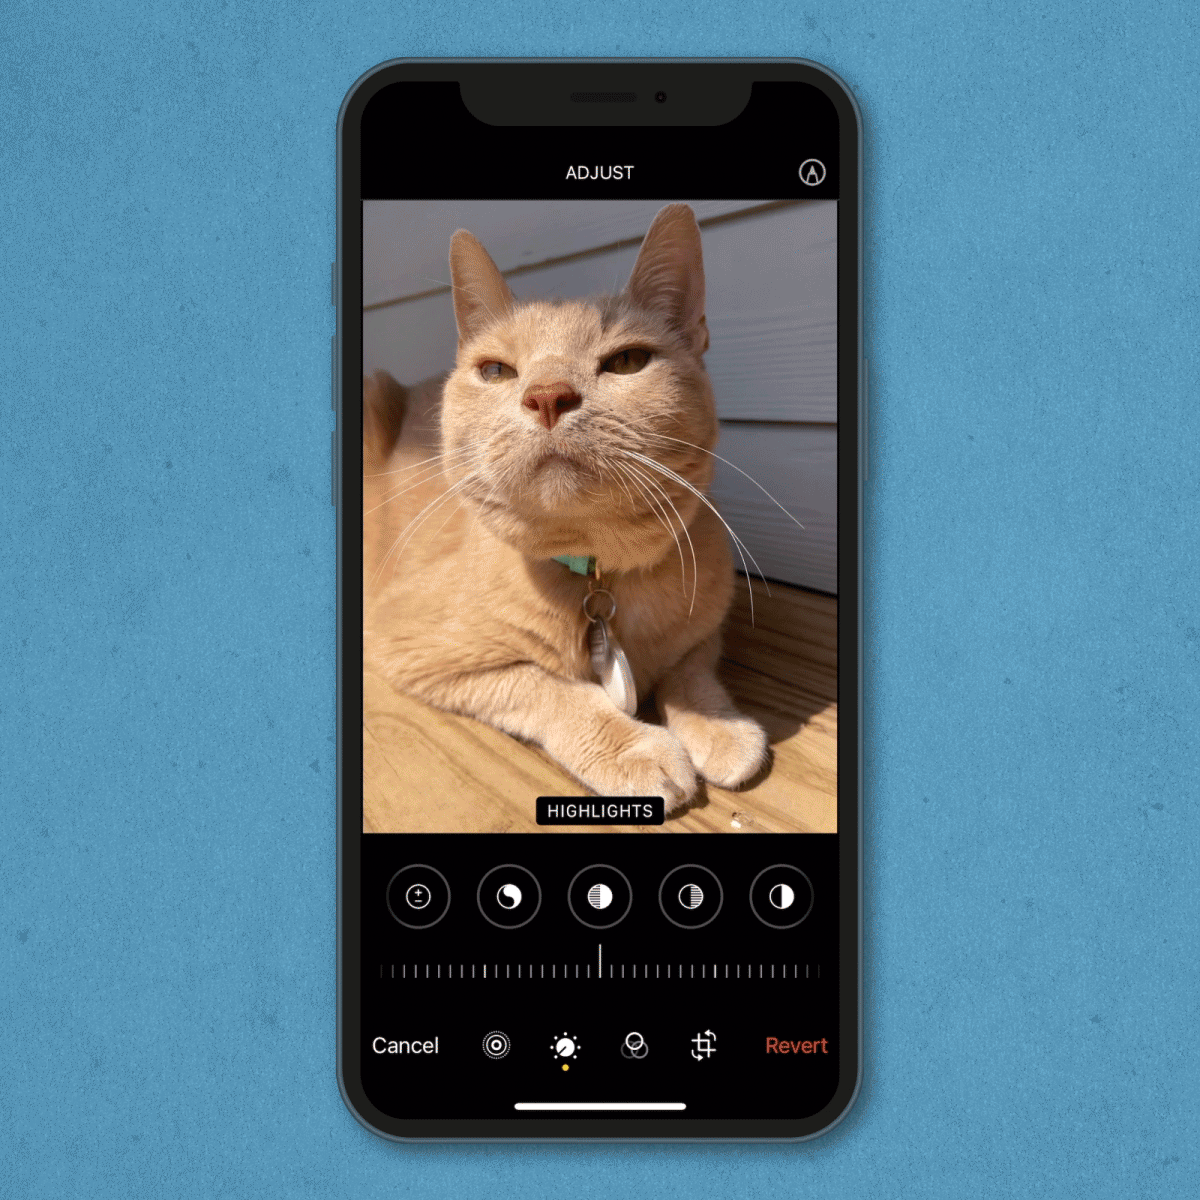 How to Edit Photos on iPhone with the Photos App — Tips from Pros